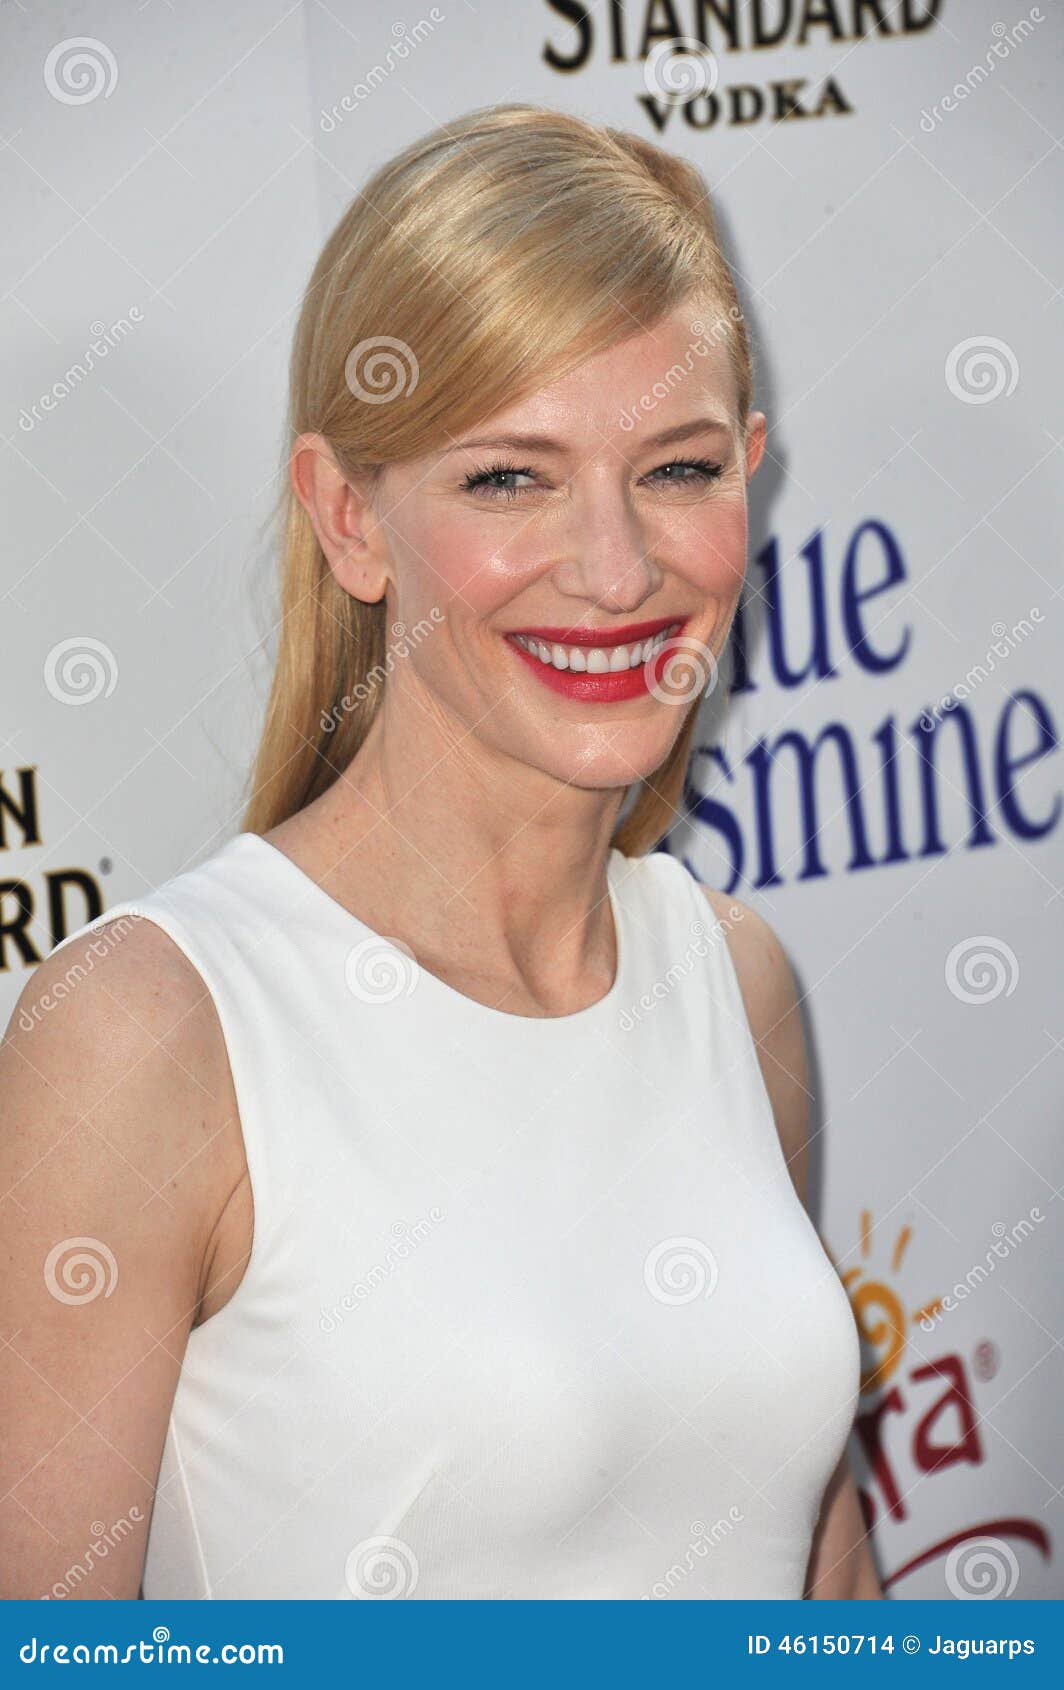 Cate Blanchett editorial stock image. Image of famous - 46150714